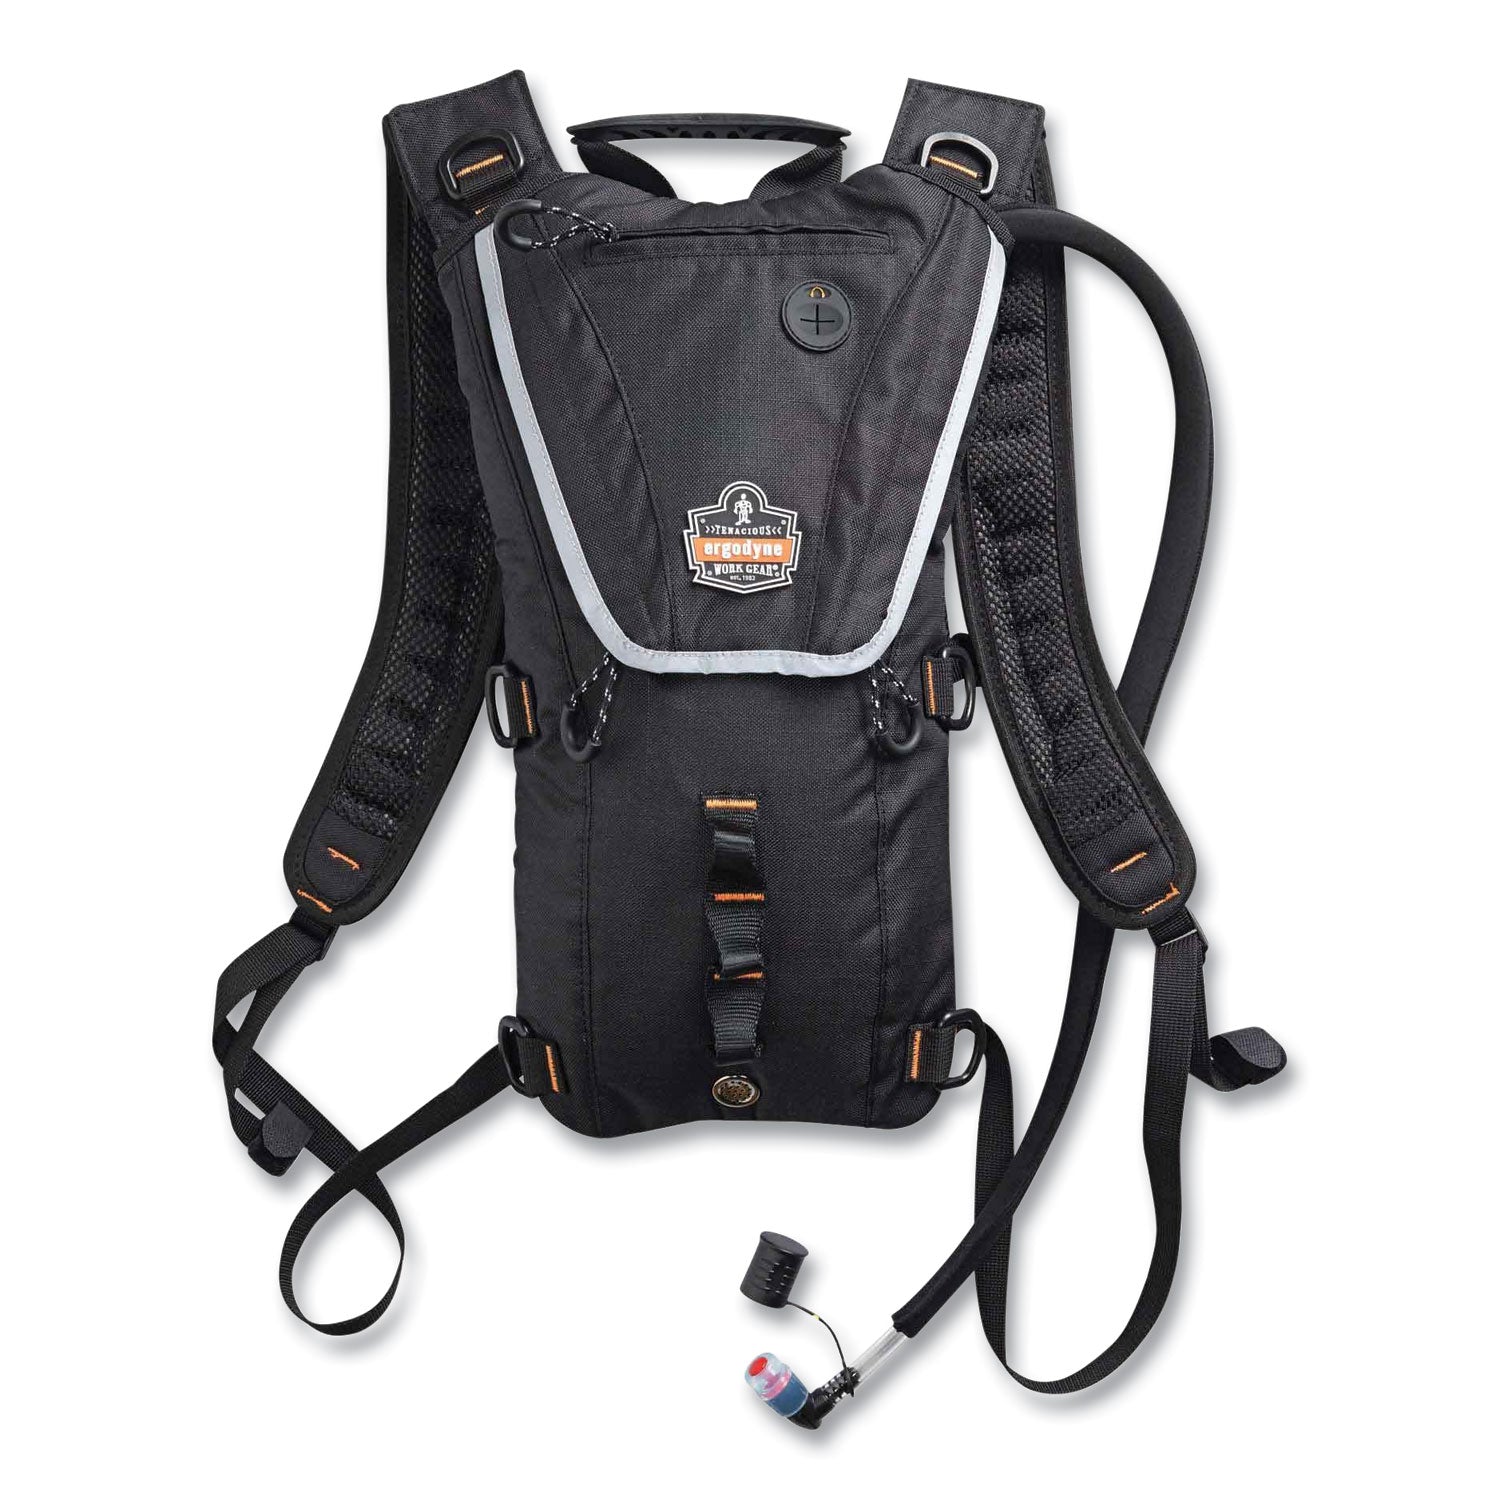 chill-its-5156-low-profile-hydration-pack-3-l-black-ships-in-1-3-business-days_ego13161 - 1